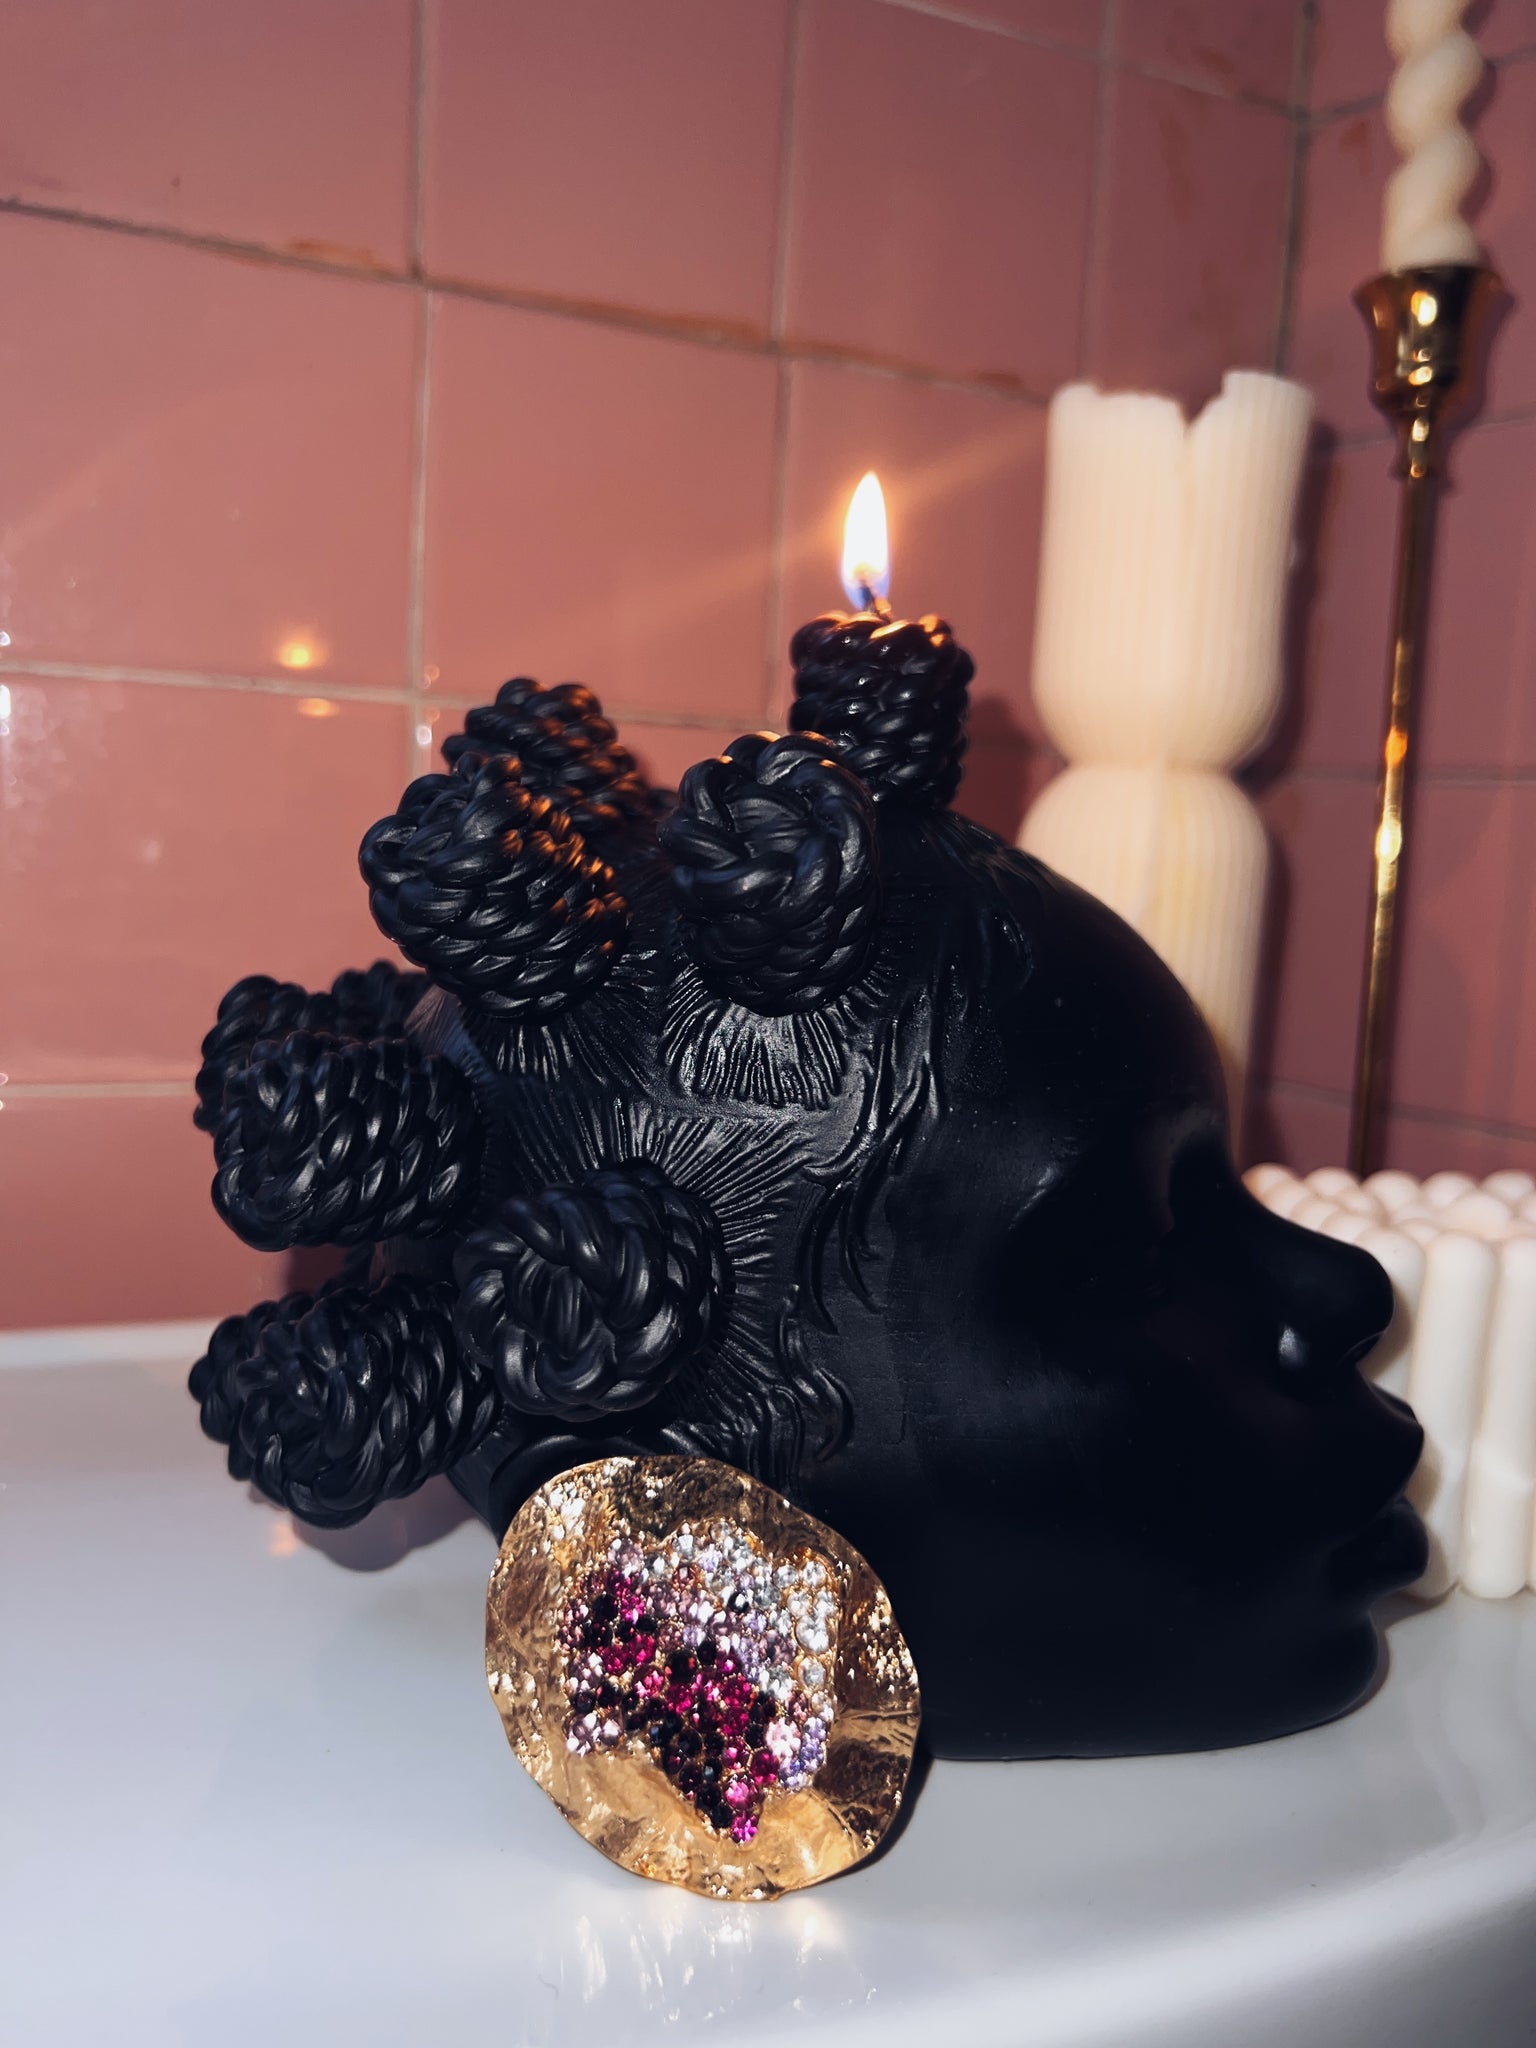 Crown Glory Bantu Knot Candle in Caviar (removable knots) - Secret Scents of Ella